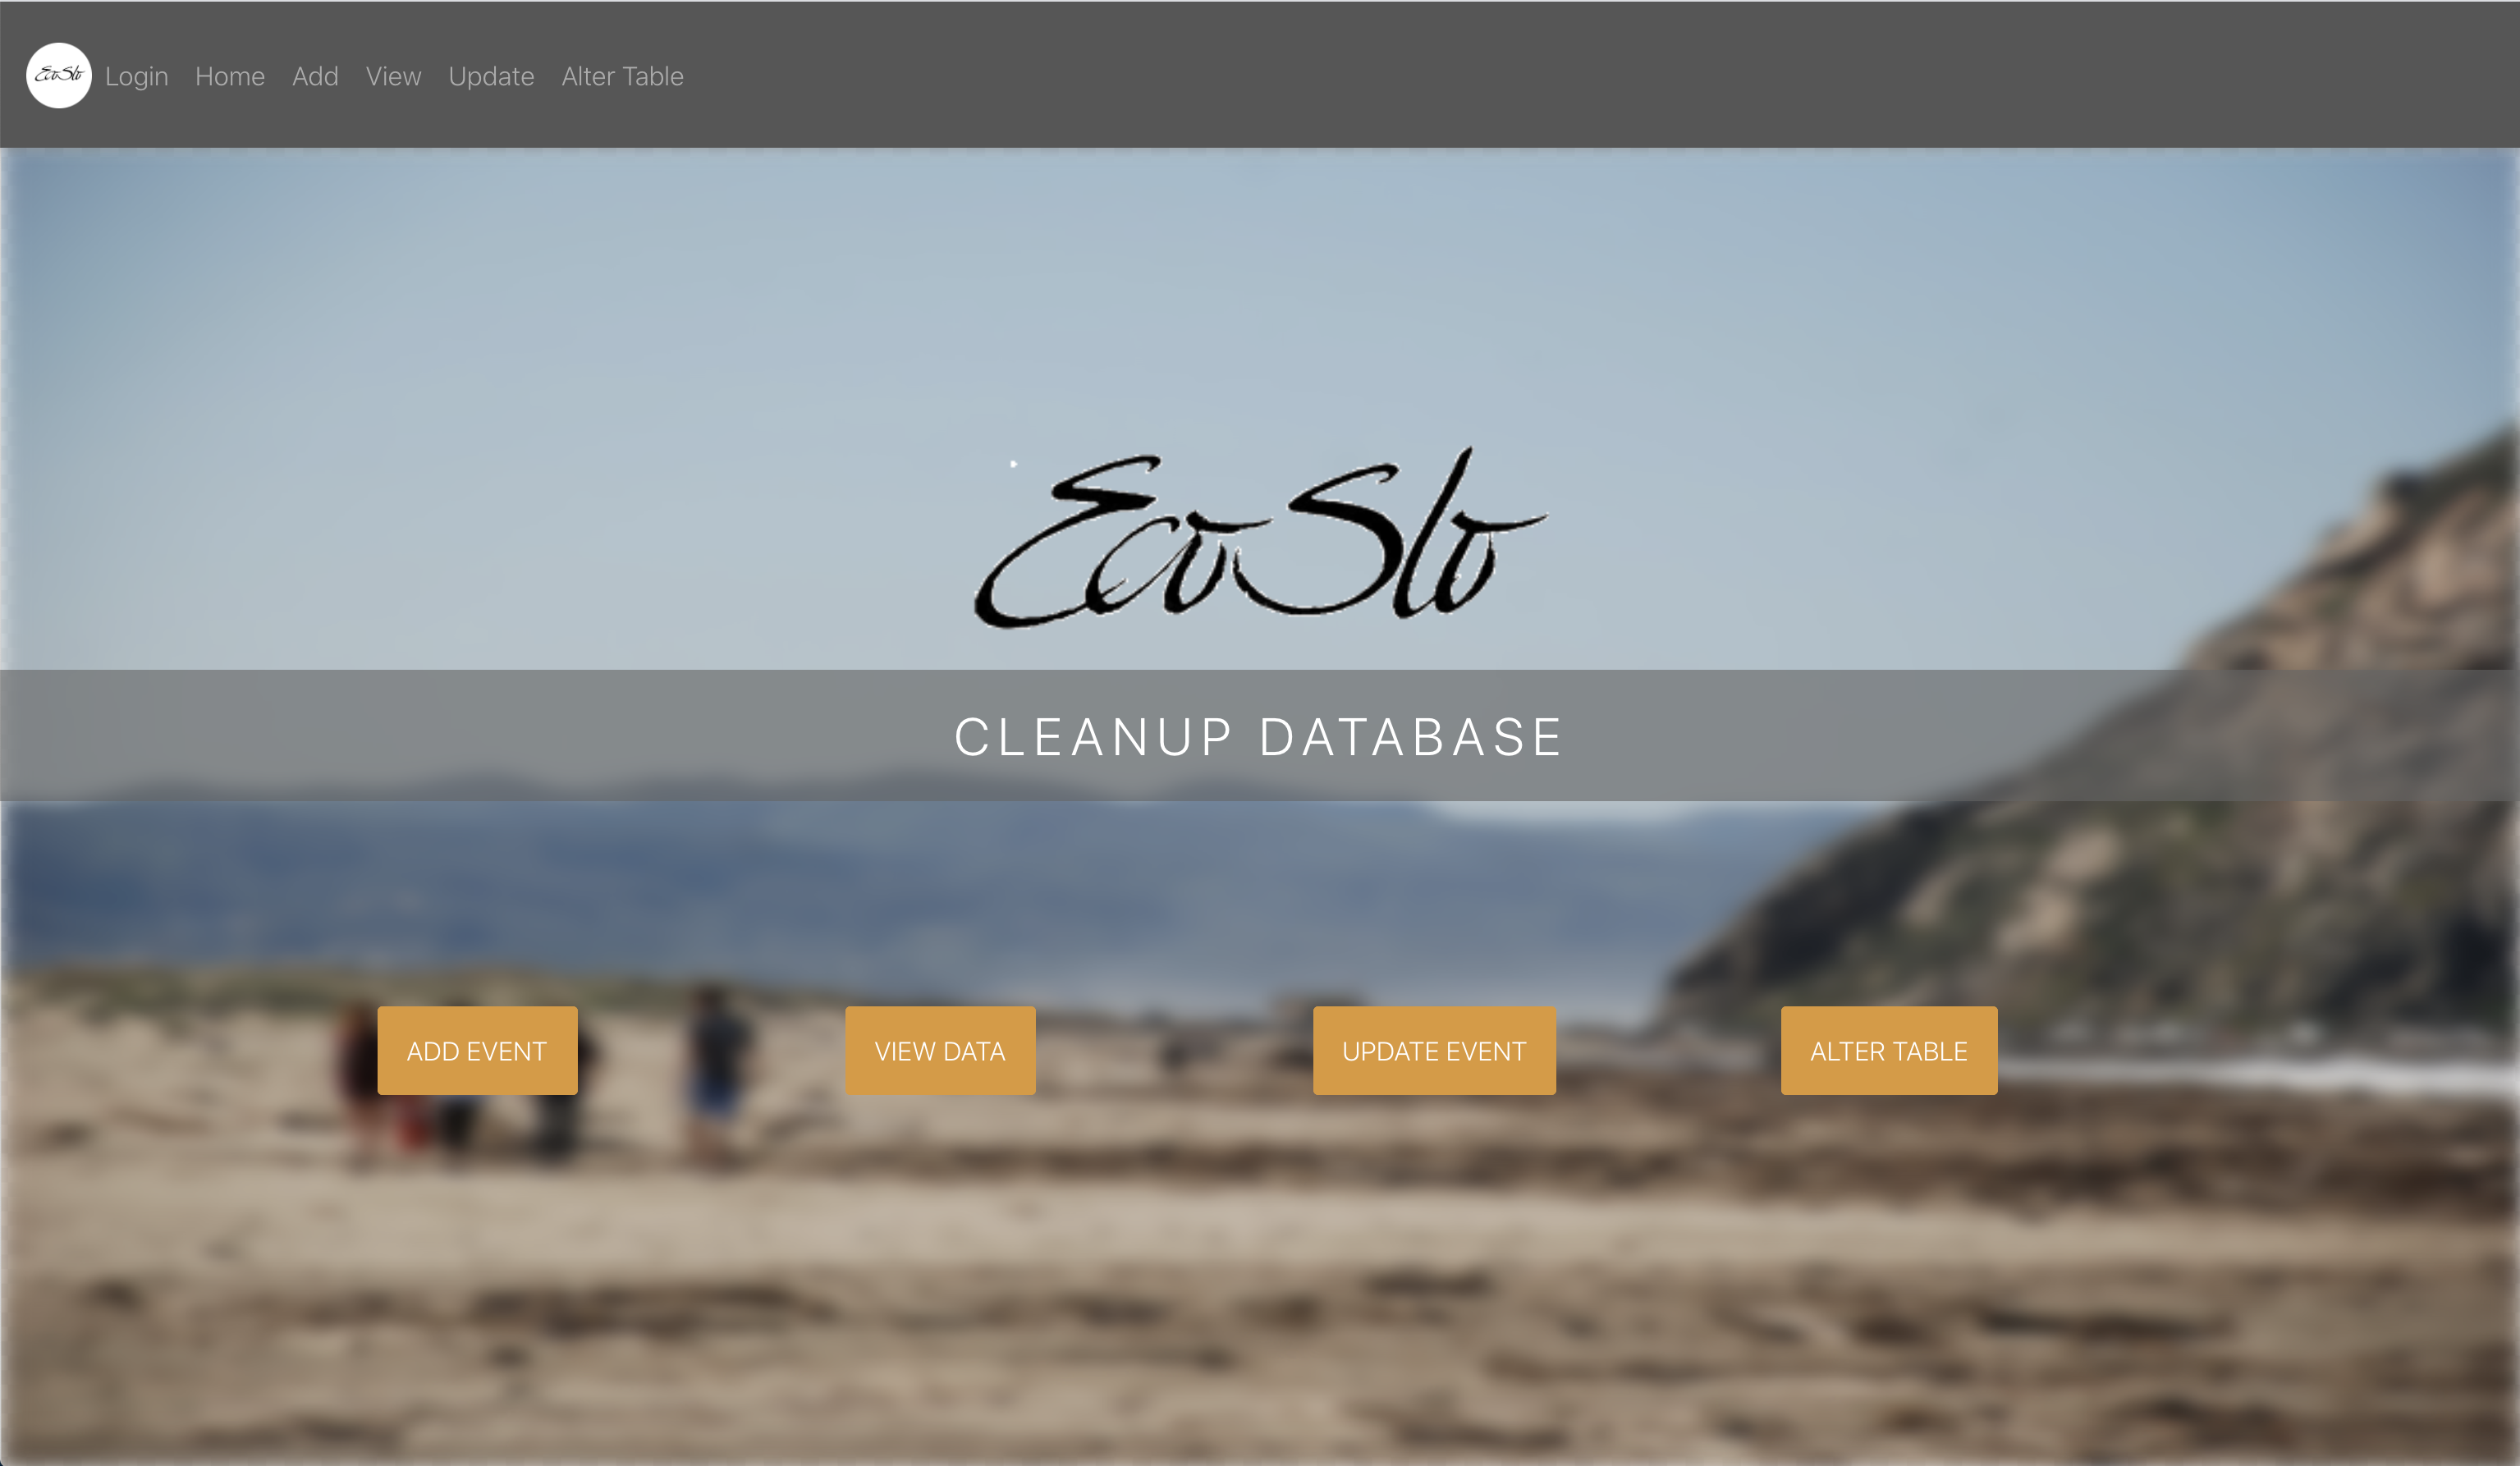 the landing page of the beach cleanup database